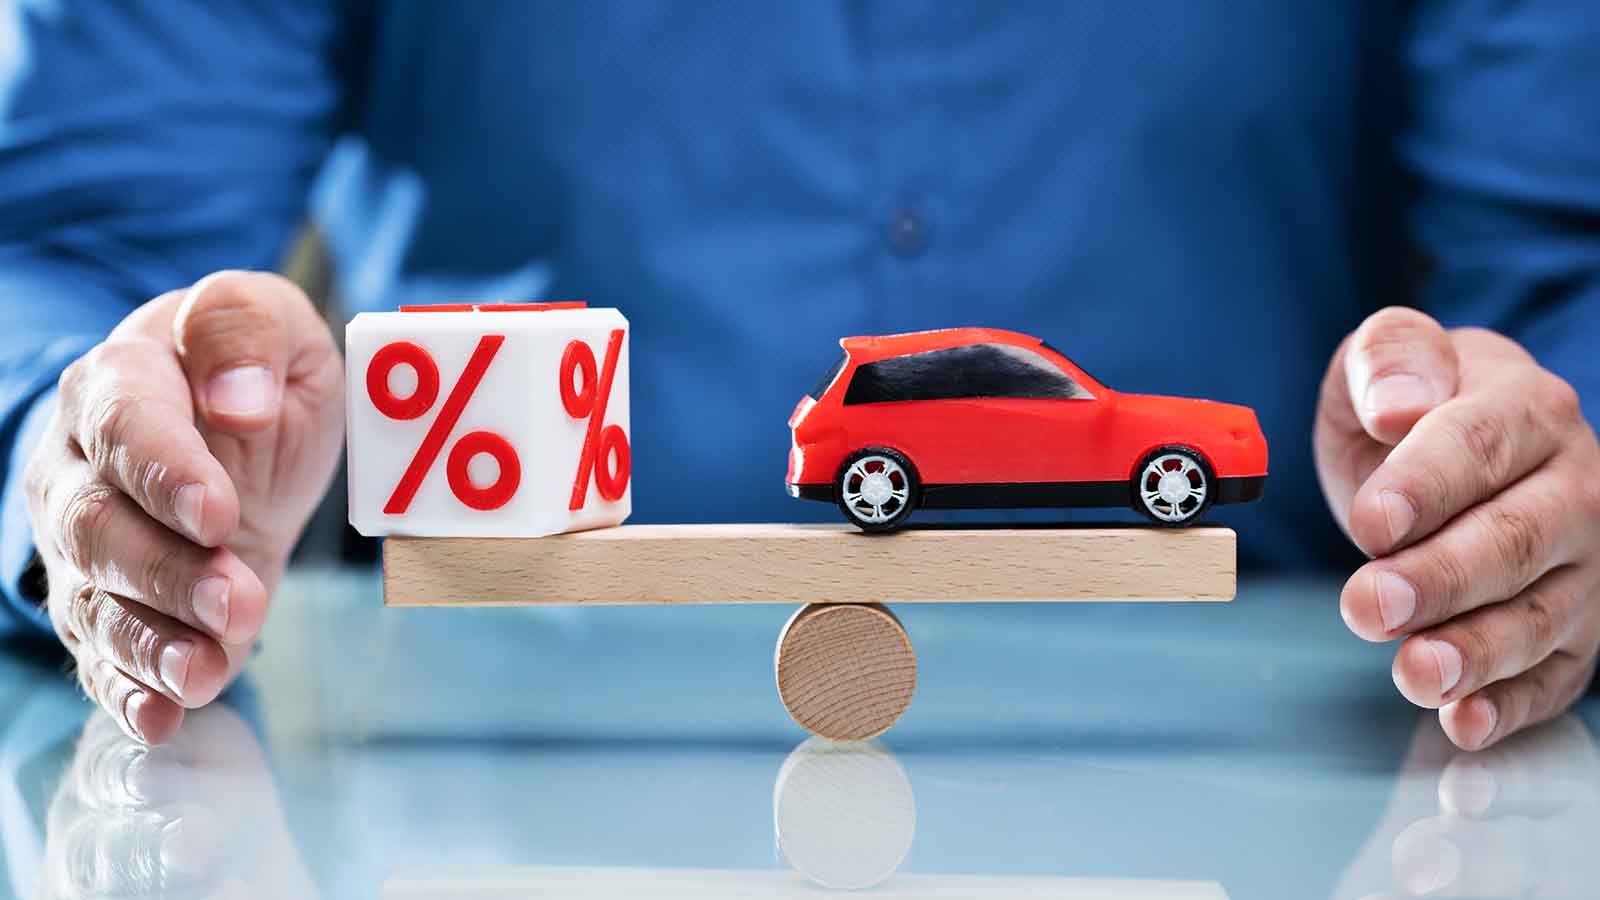 Save On Car Insurance – What Every User Should Look At